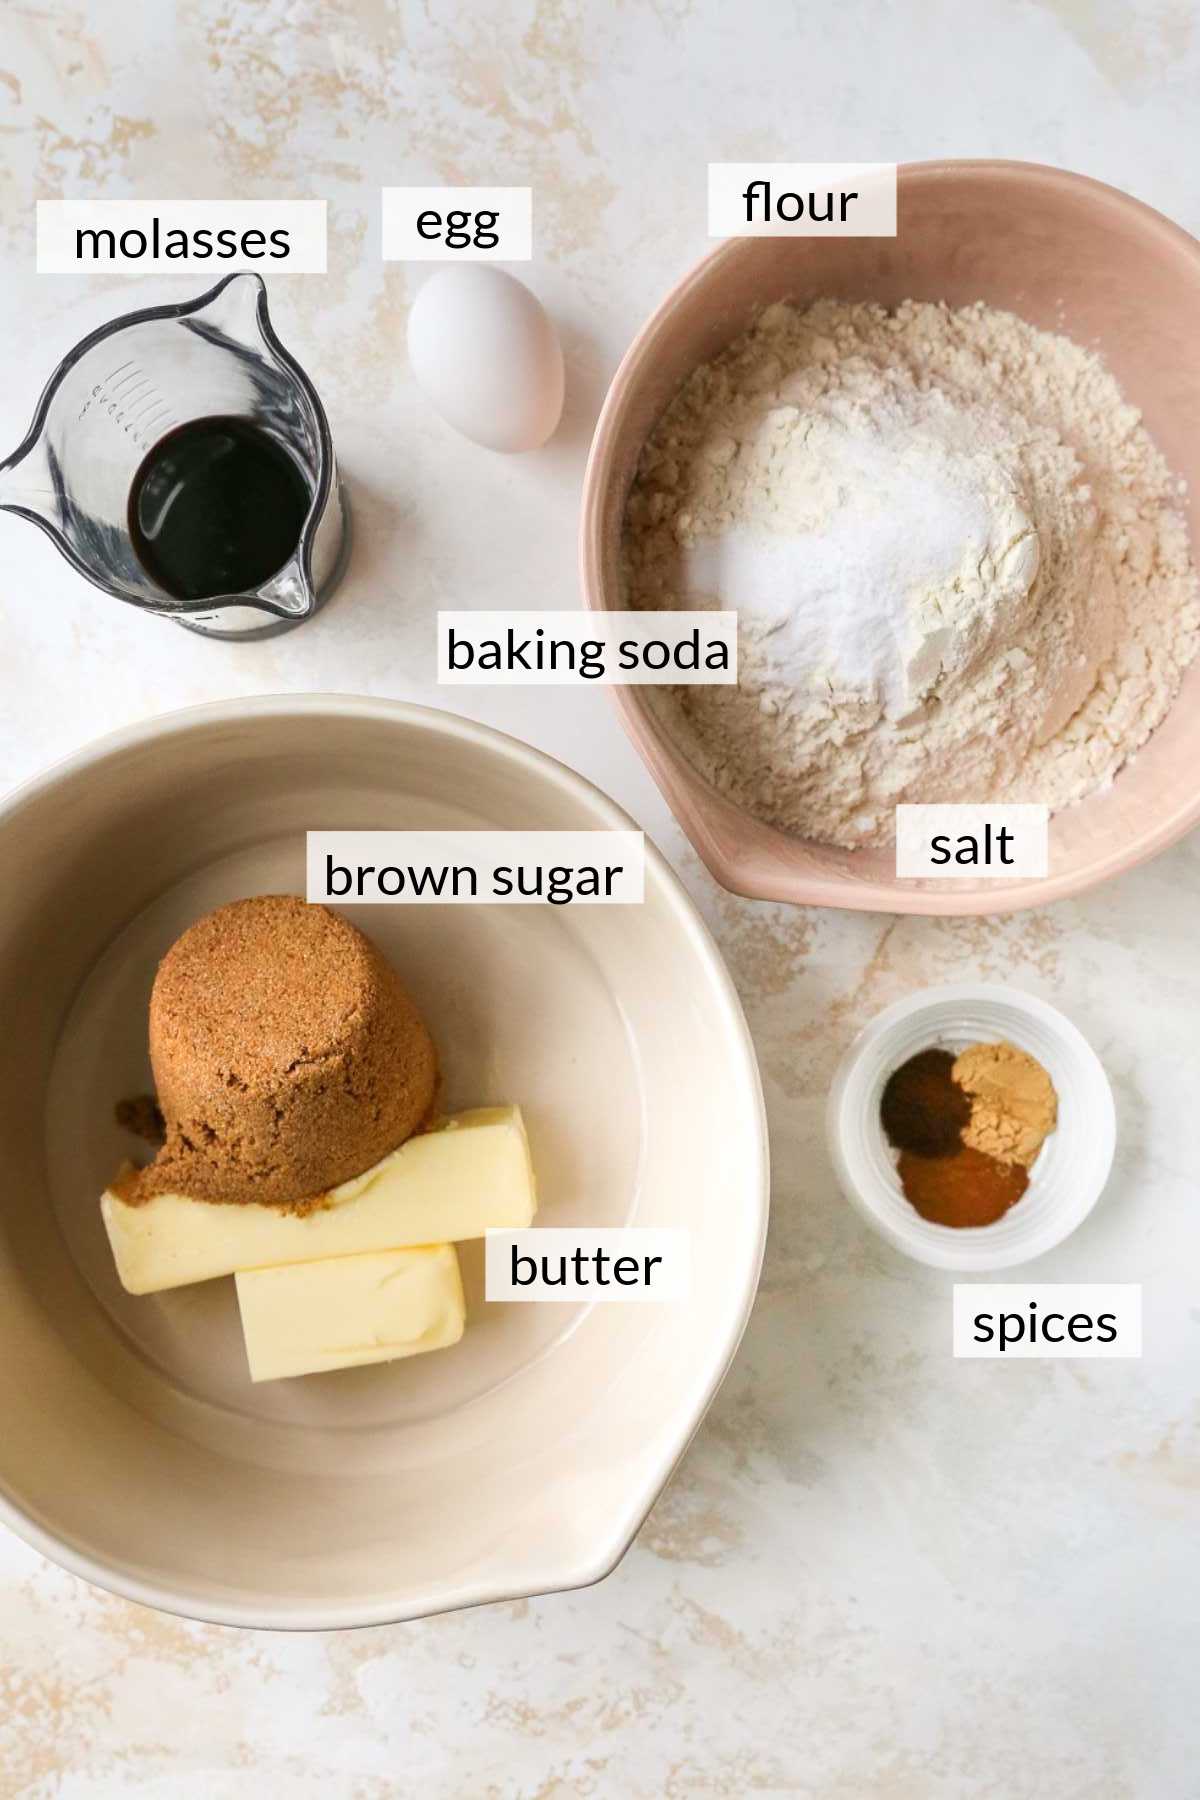 Brown sugar, butter, molasses, spices, flour, baking soda and salt divided into bowls.